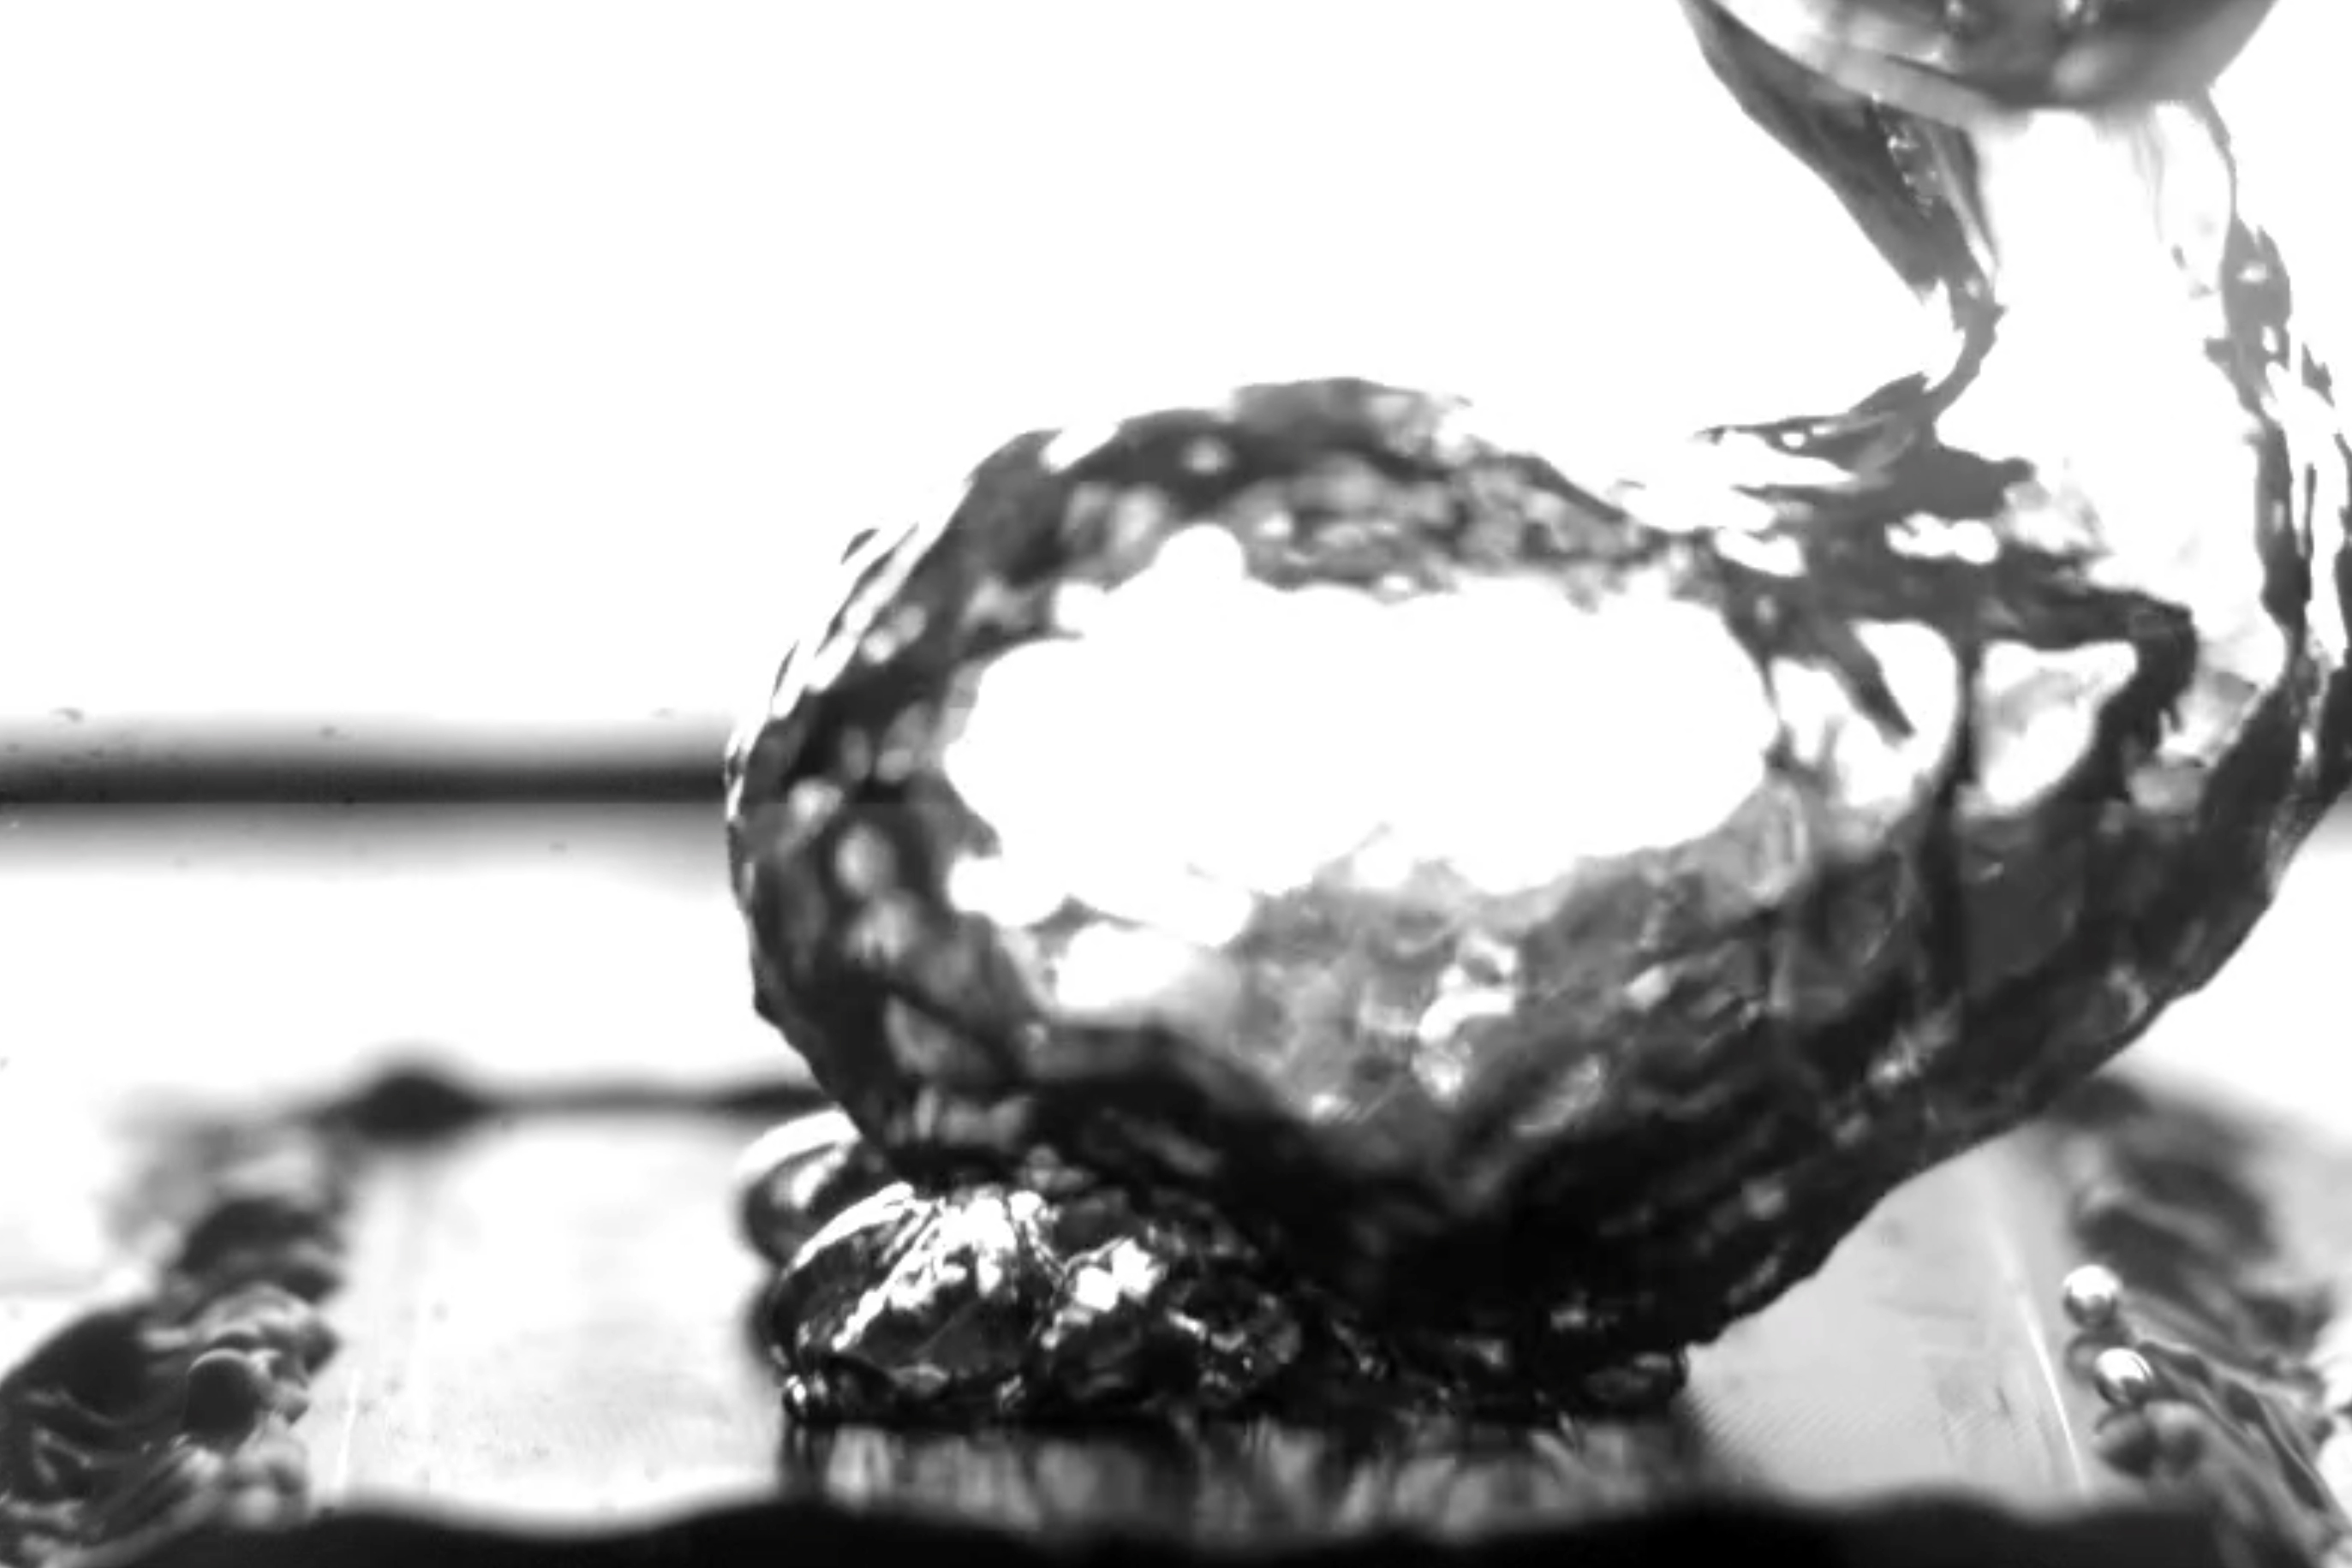 MIT engineers design surfaces that make water boil more efficiently